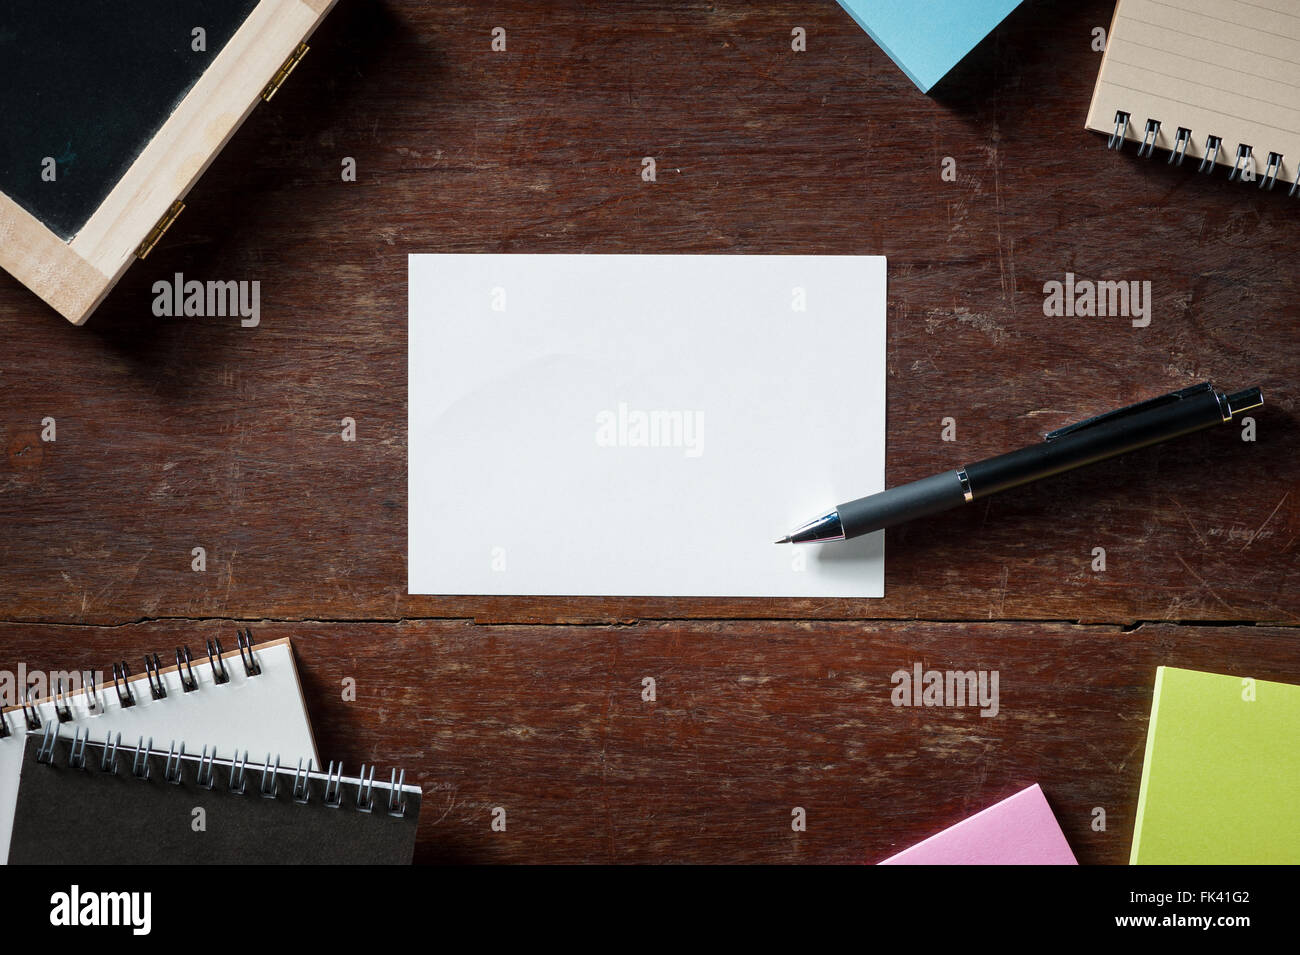 Blank paper with area for text or message, pen, notebook, and sticky paper on wood table with low key scene Stock Photo